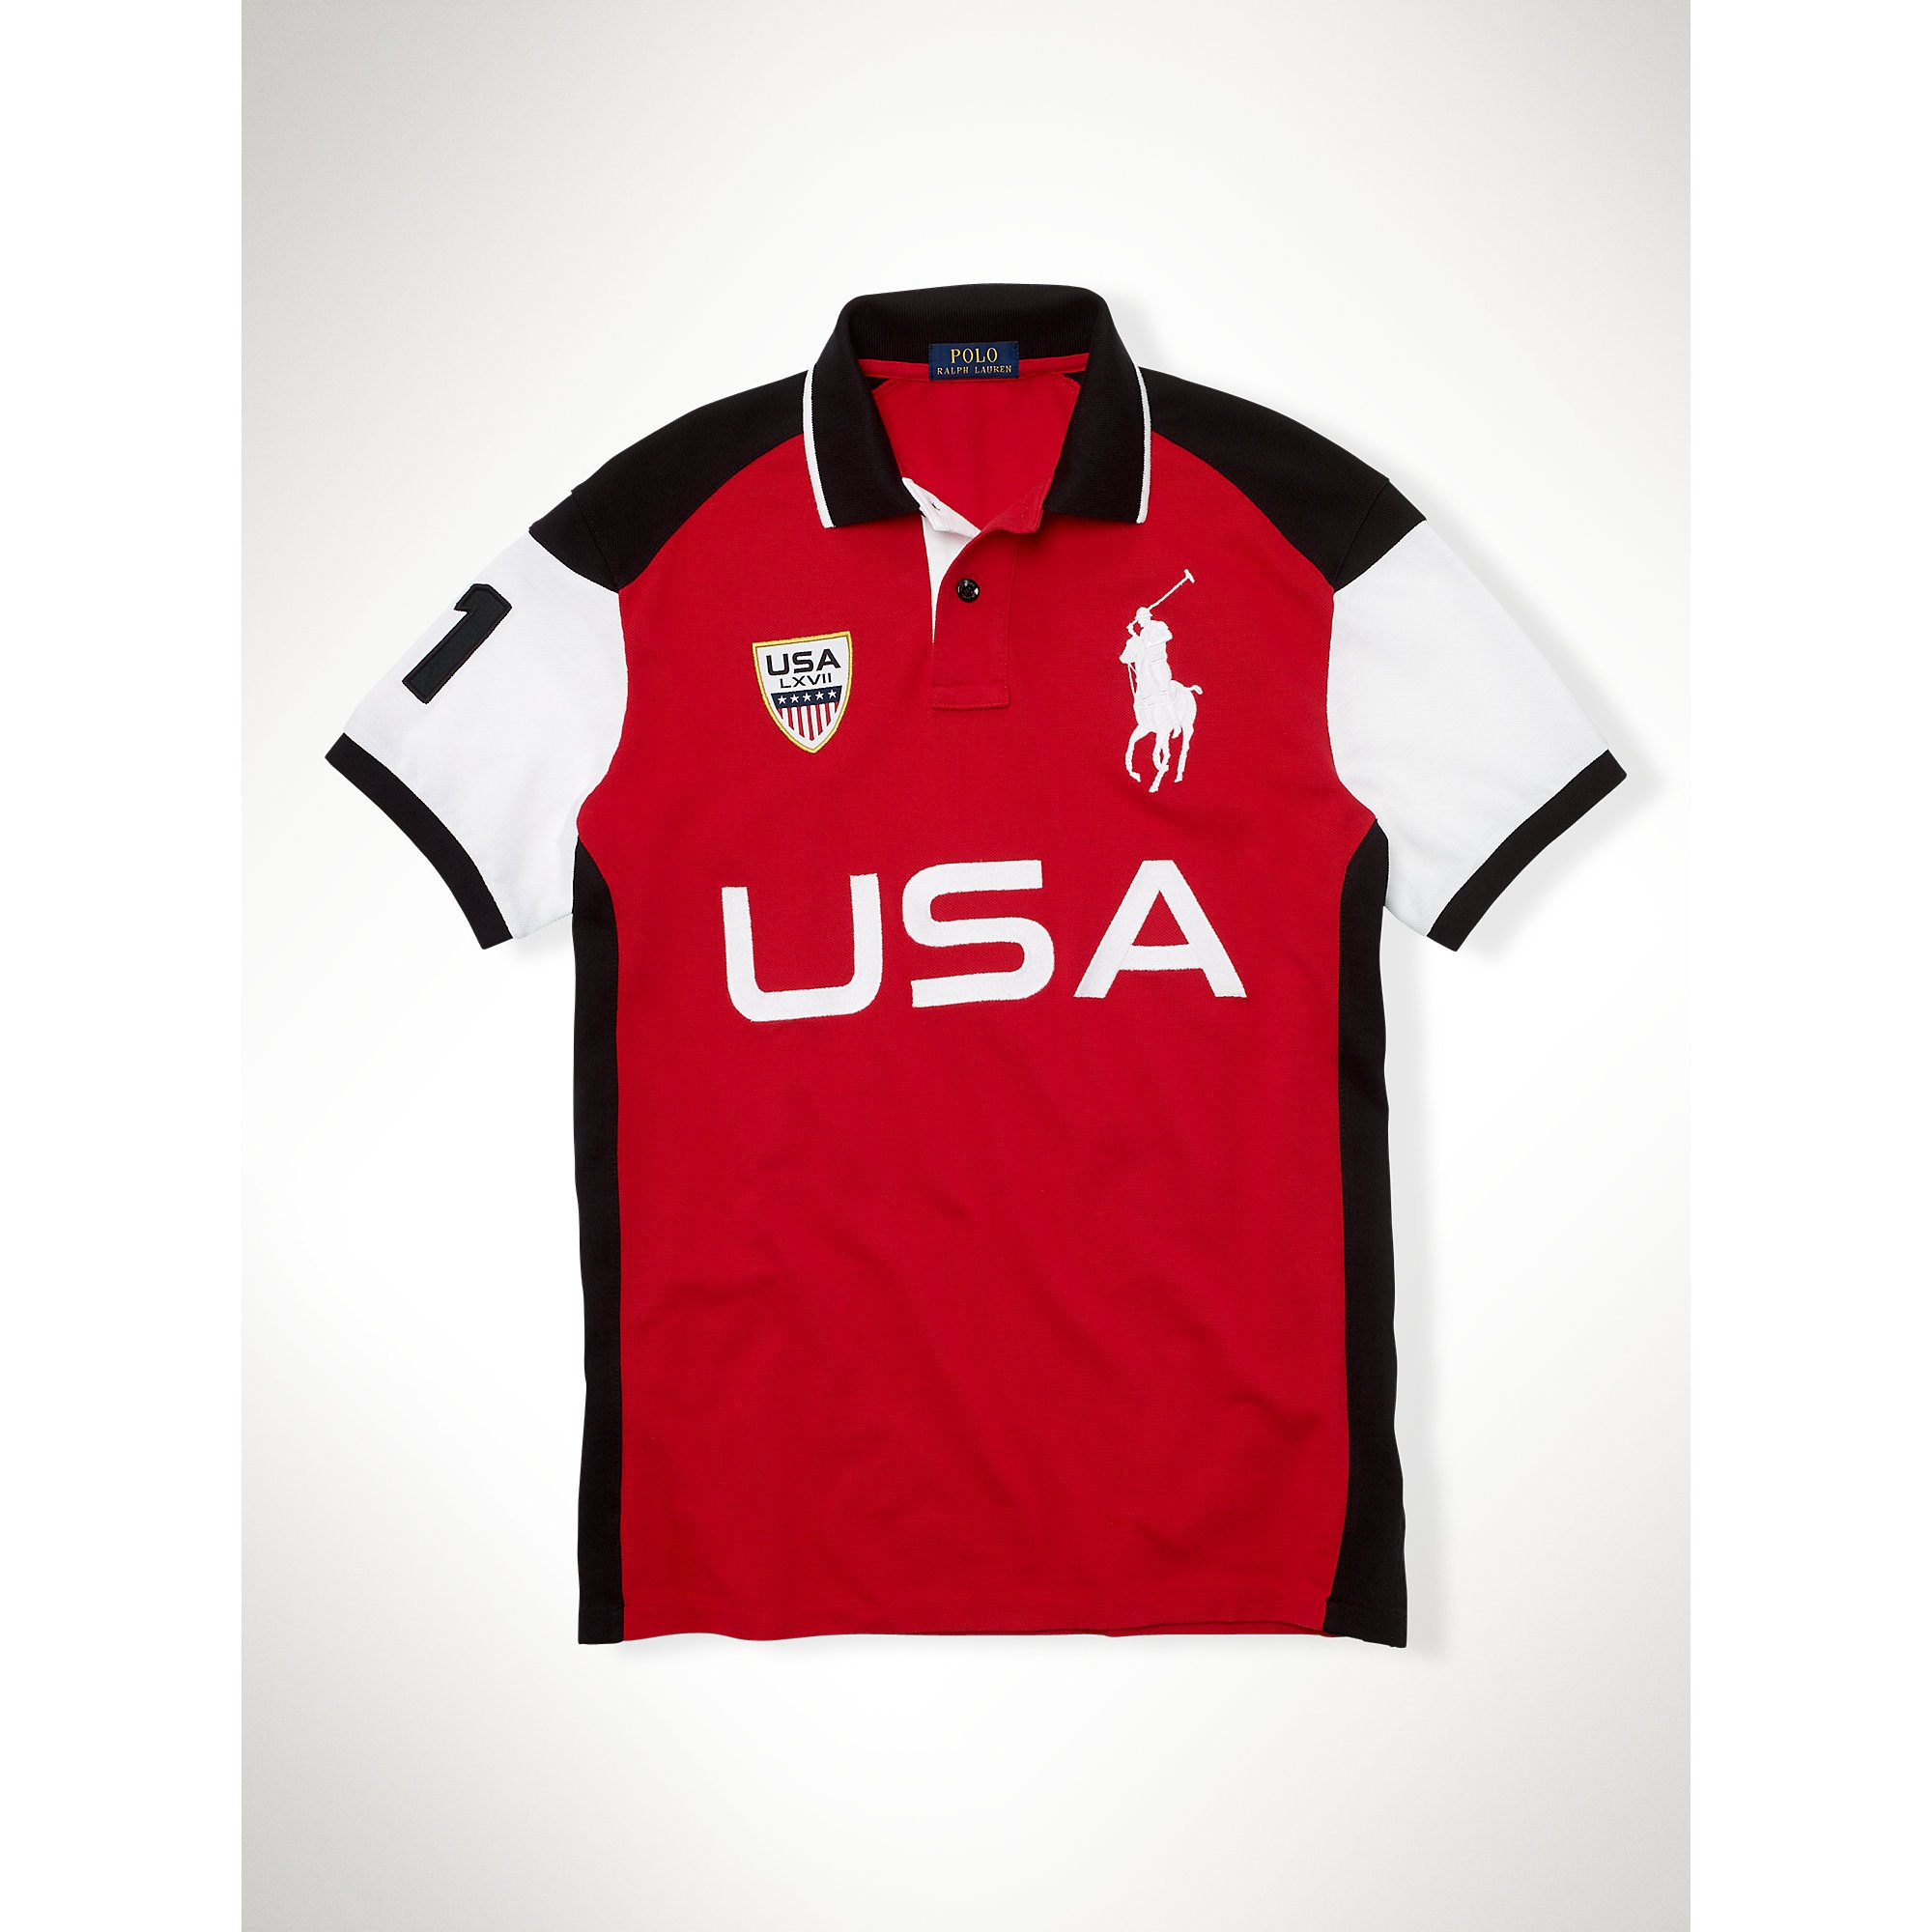 Polo Ralph Lauren Custom-Fit "Usa" Polo Shirt in Red for Men - Lyst